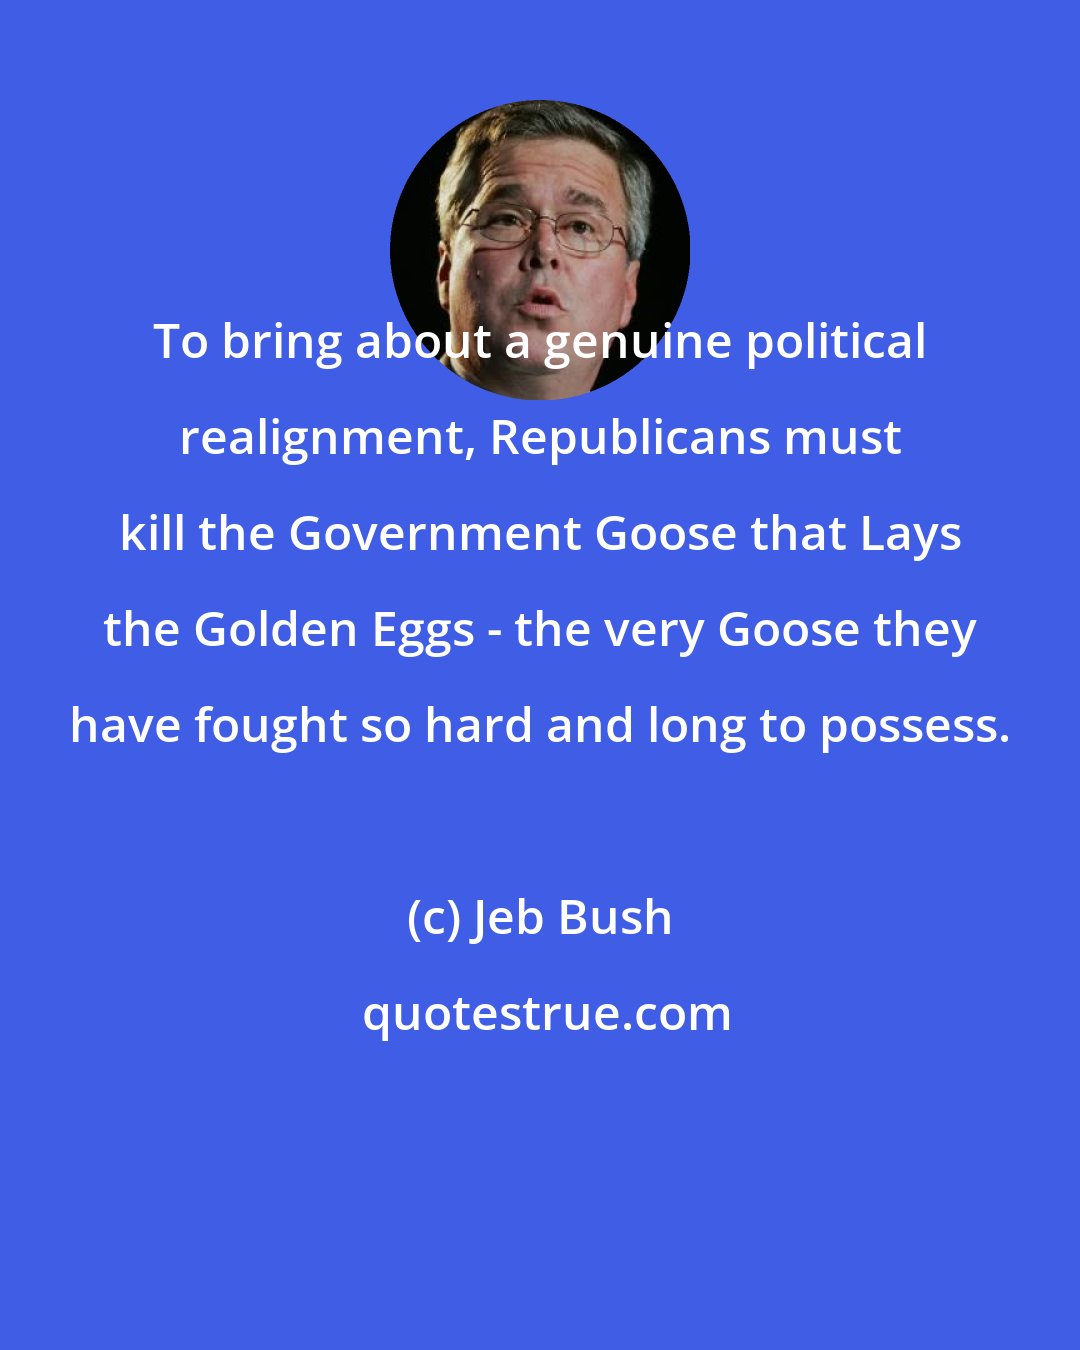 Jeb Bush: To bring about a genuine political realignment, Republicans must kill the Government Goose that Lays the Golden Eggs - the very Goose they have fought so hard and long to possess.